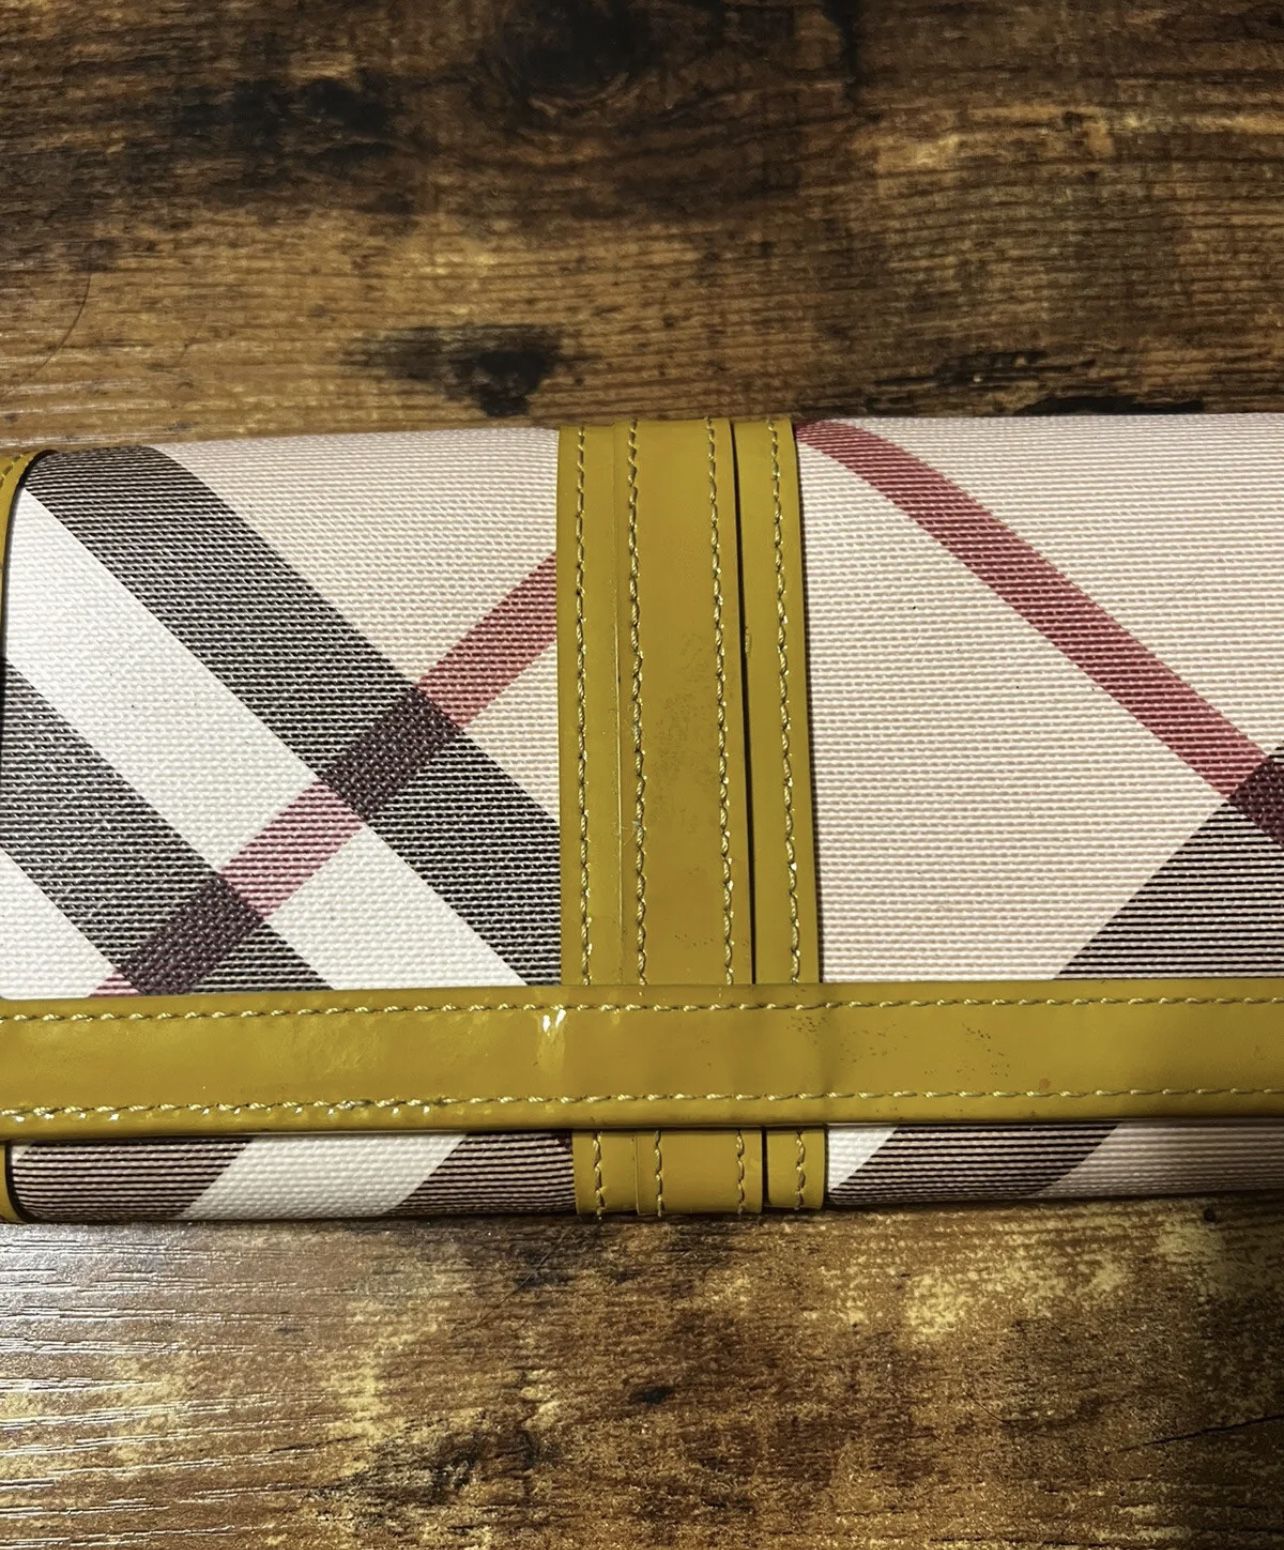 Authentic Burberry wallet